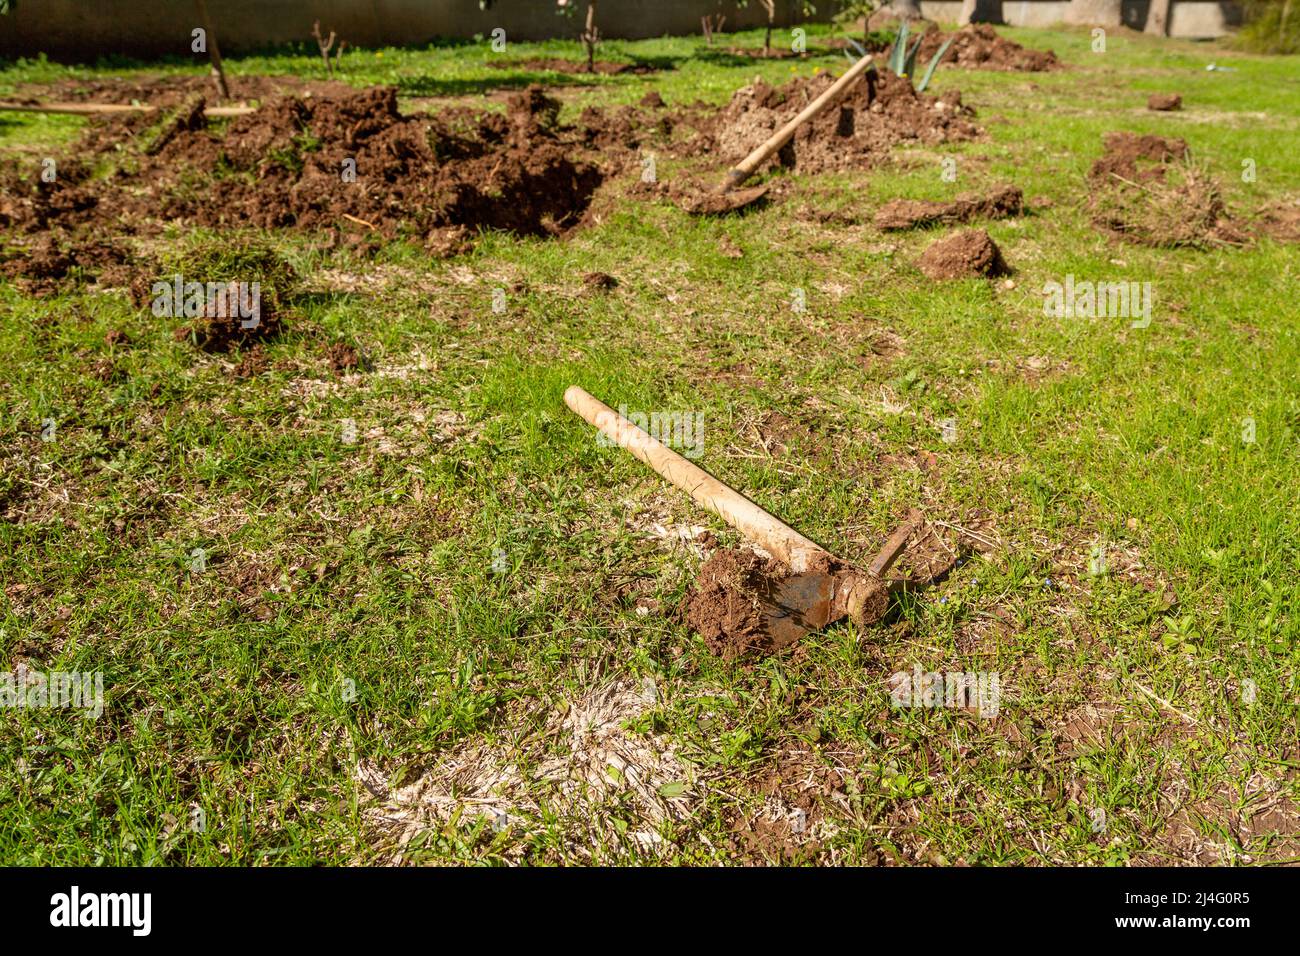 Farming shovel and hoe on pitted soil. Hoe in selective focus. There is fresh soil on the used farming hoe. Gardening, spring, agriculture concept. Stock Photo